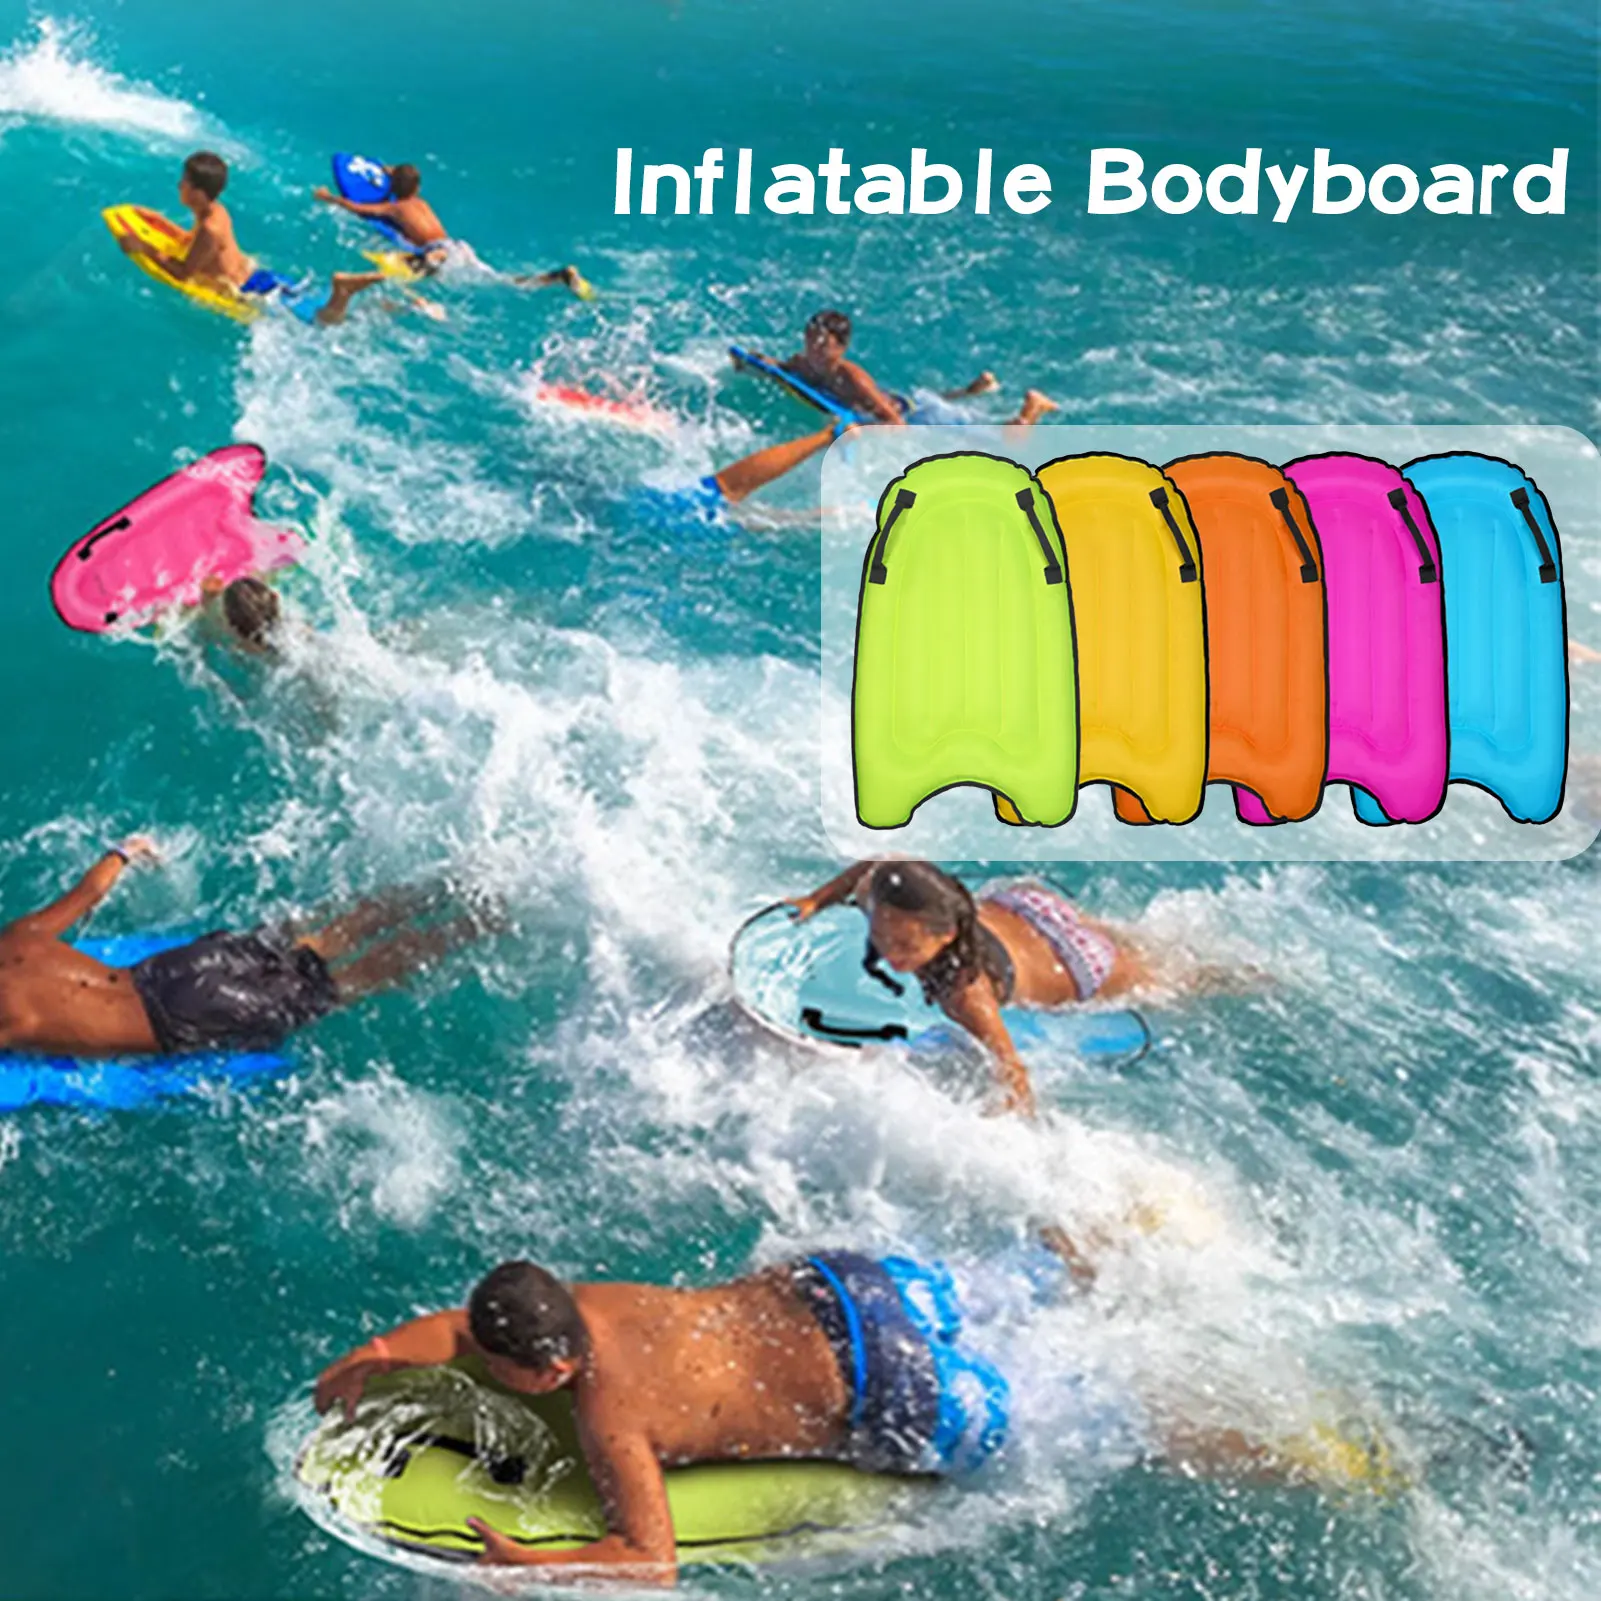 Portable Iatable Surfboard Foldable Bodyboard With Handle Pool Floating Mattress Toy For Children Learning To Swim